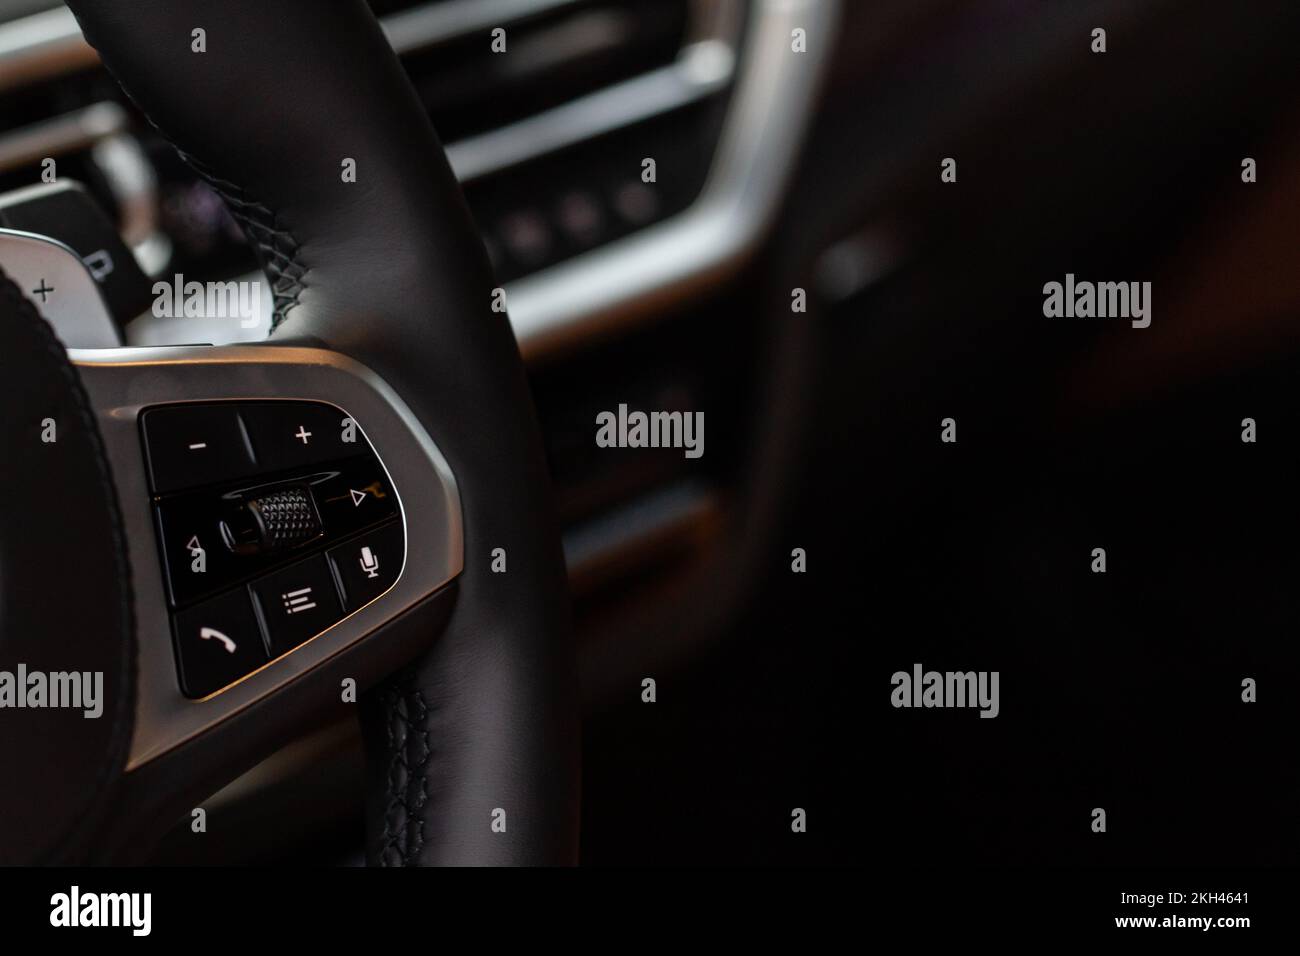 Call buttons on car steering wheel. Audio control buttons on the steering wheel of a modern car. Stock Photo